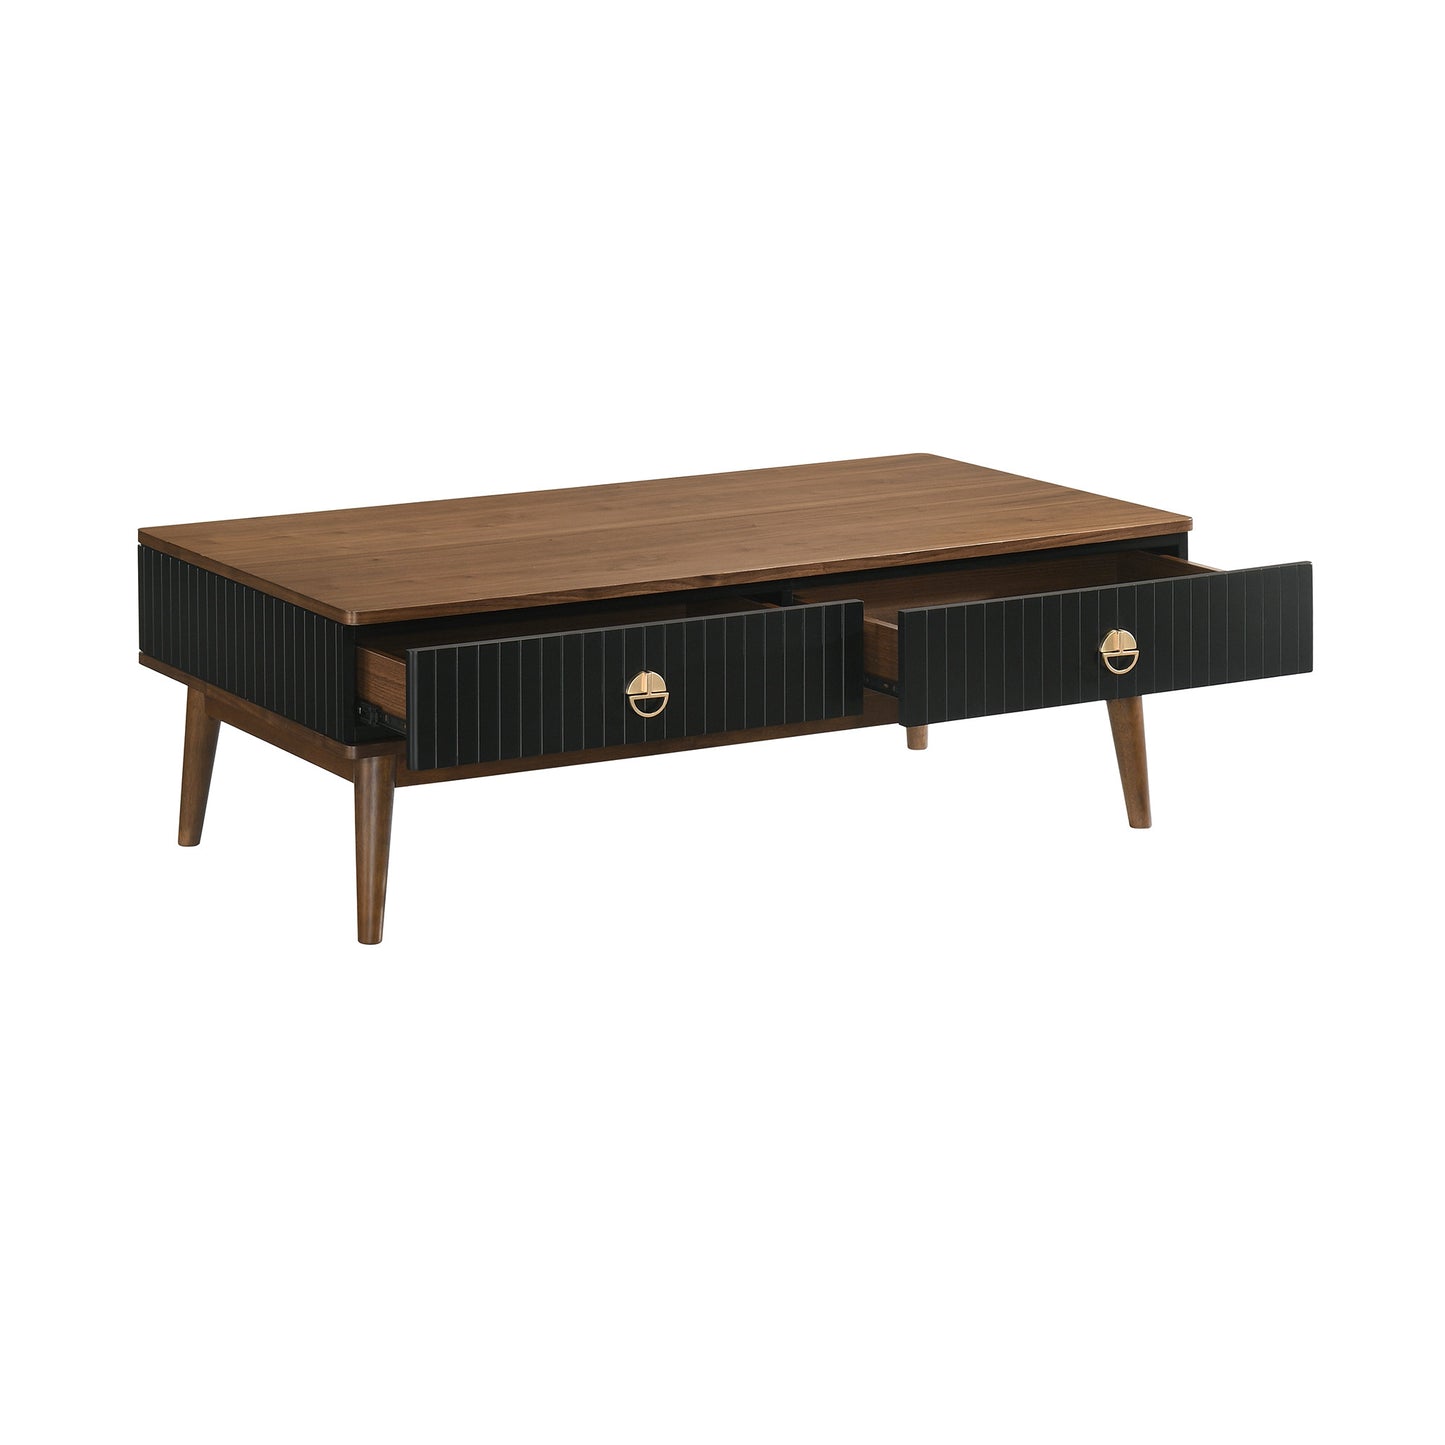 47" Brown Solid Wood Coffee Table With Two Drawers